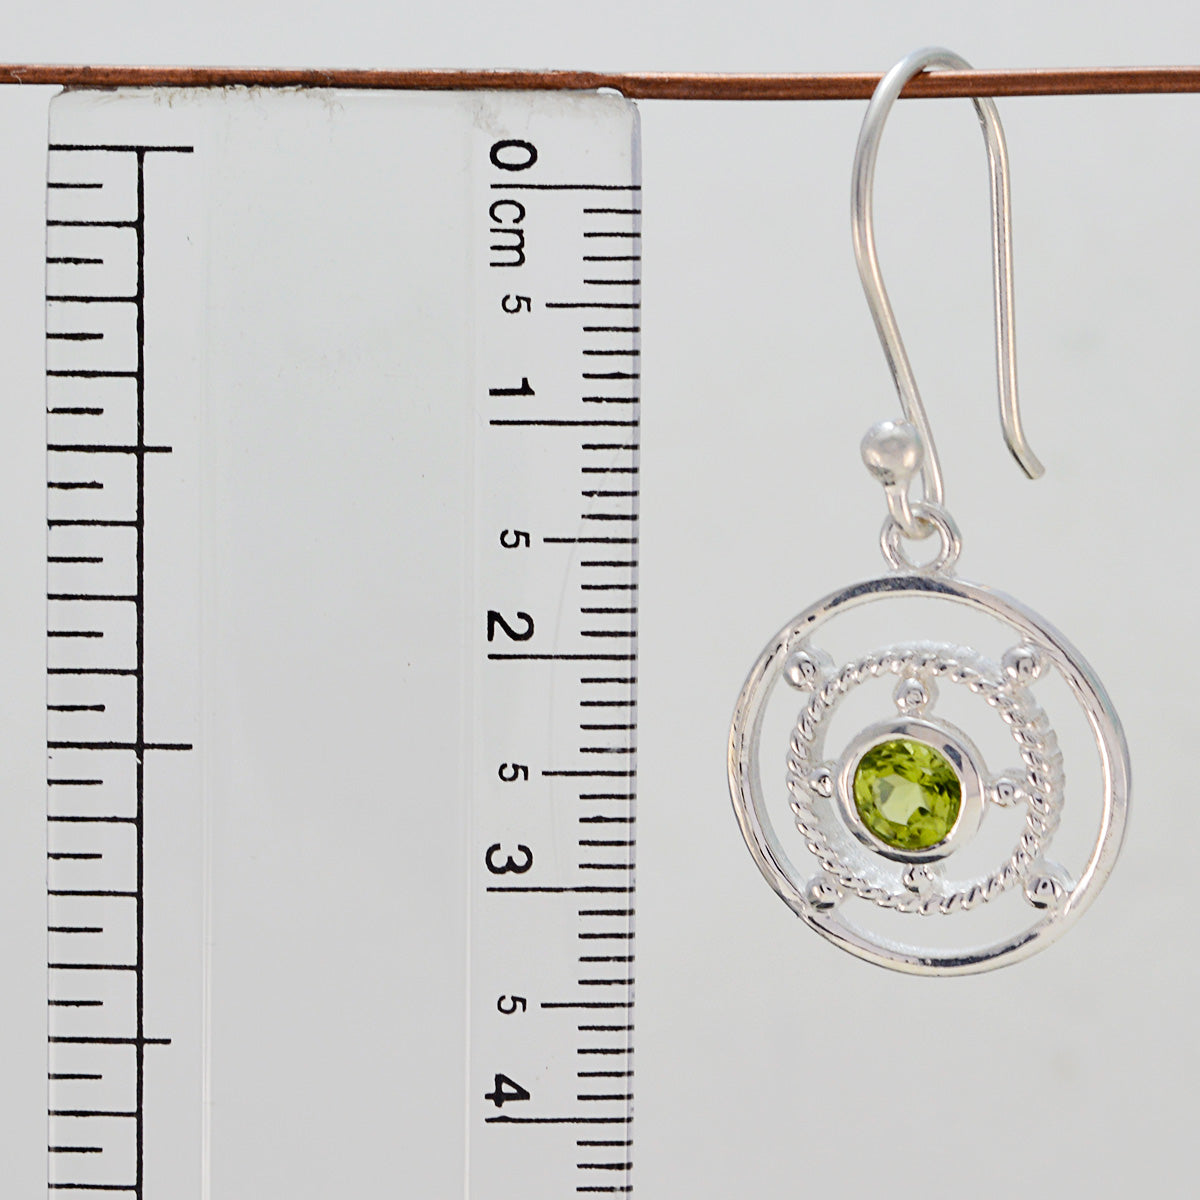 Riyo Real Gemstones round Faceted Green Peridot Silver Earrings gift for graduation